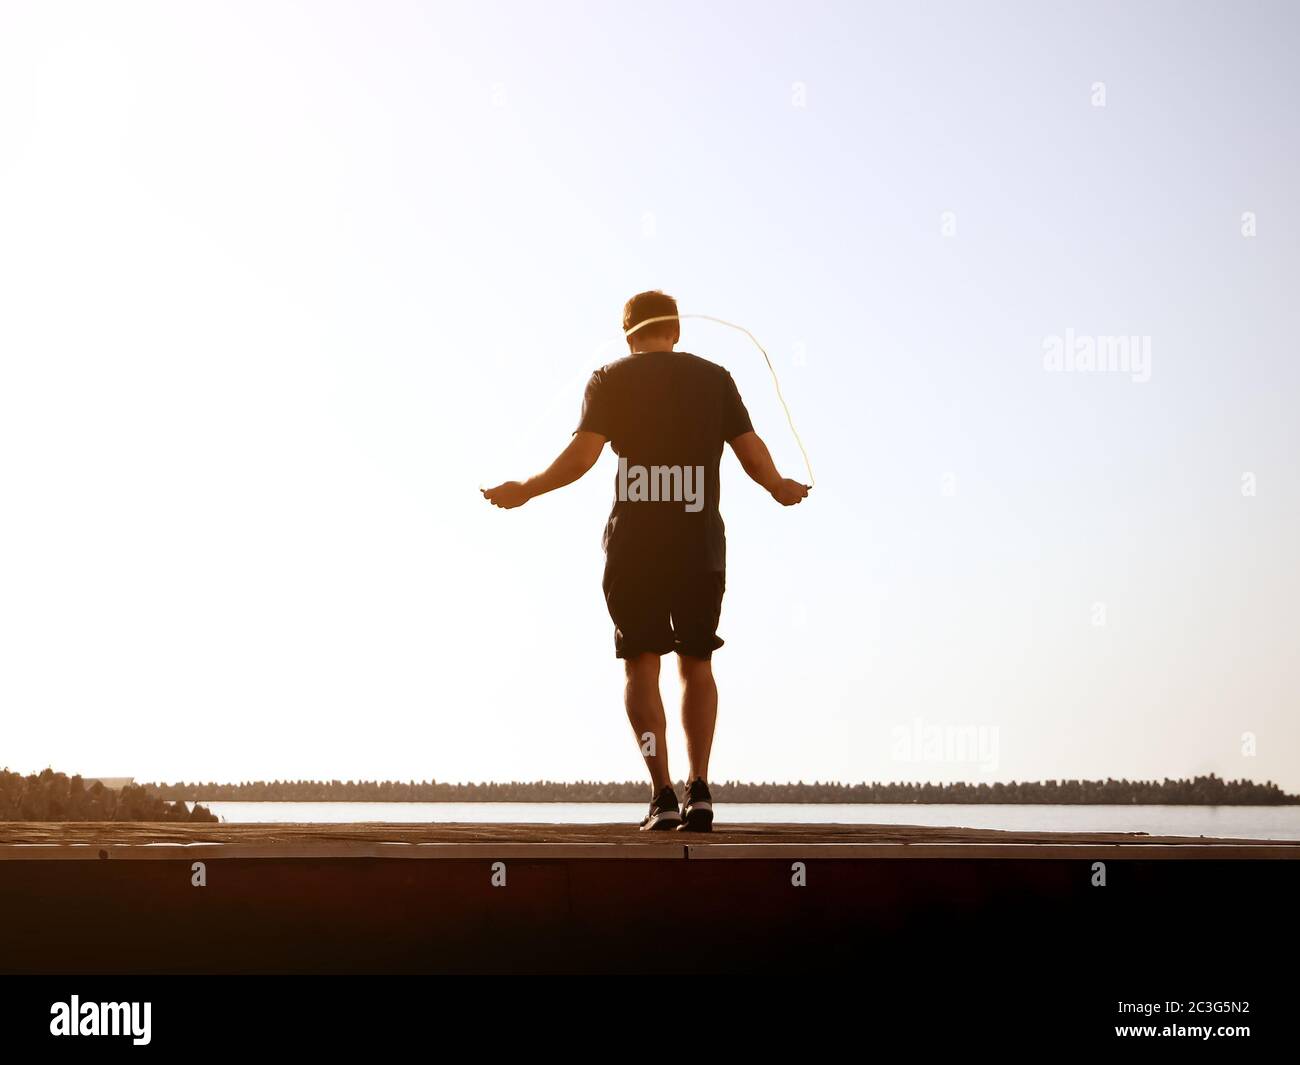 Guy in shorts jumps on a rope on a sunny day on backgraund sky. Artistic effect. Blurred image Stock Photo